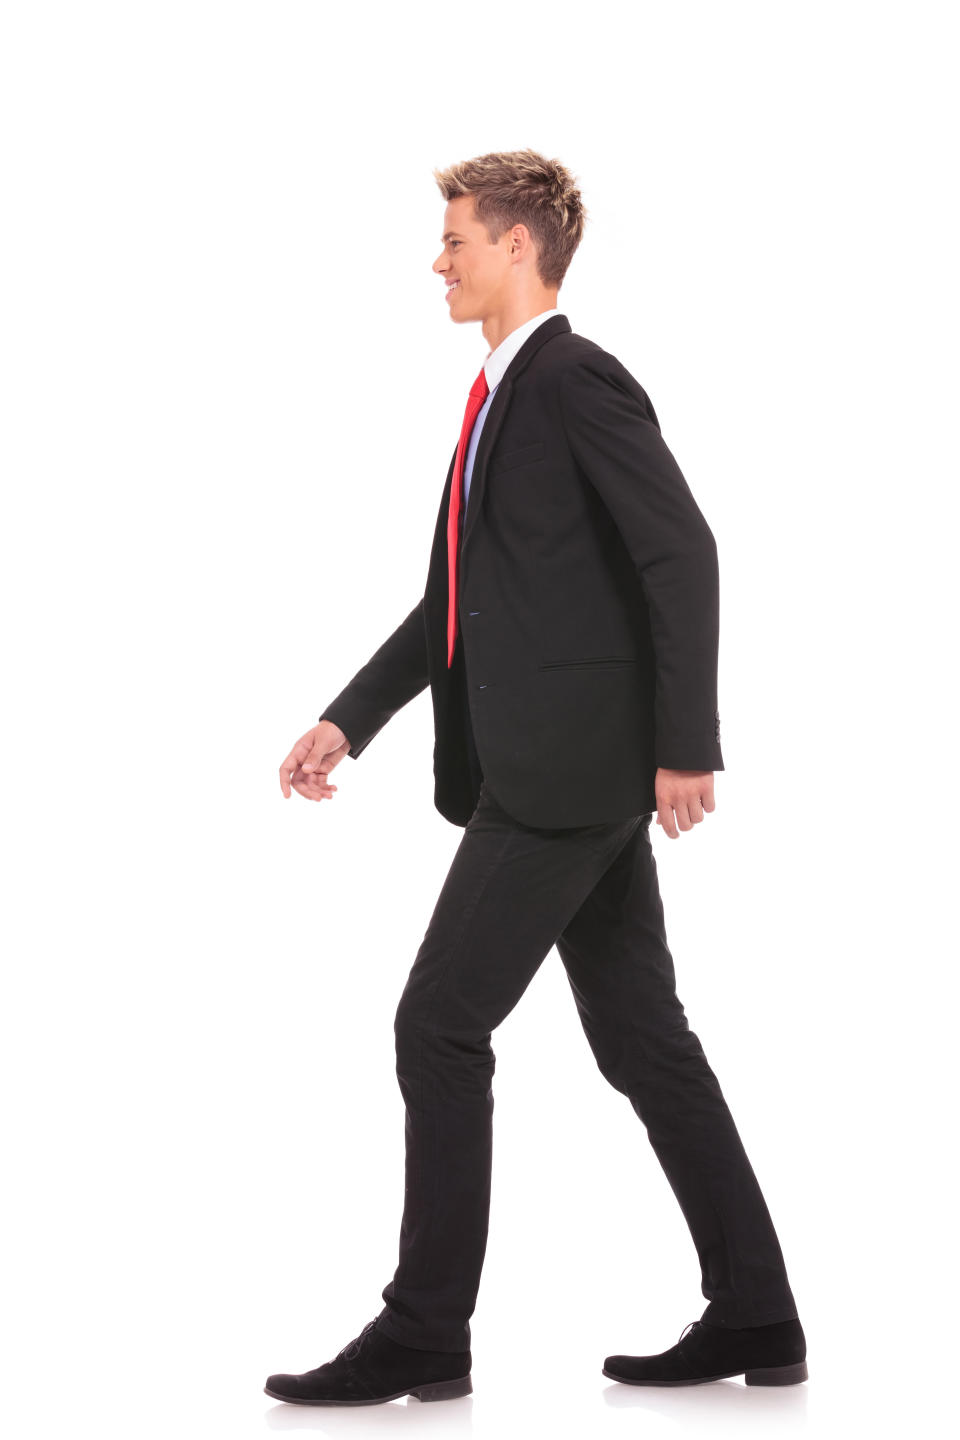 Standing up and <a href="http://www.businessnewsdaily.com/3272-improve-productivity-tips.html">walking around the office </a>every so often will help you stay energized throughout the day. 